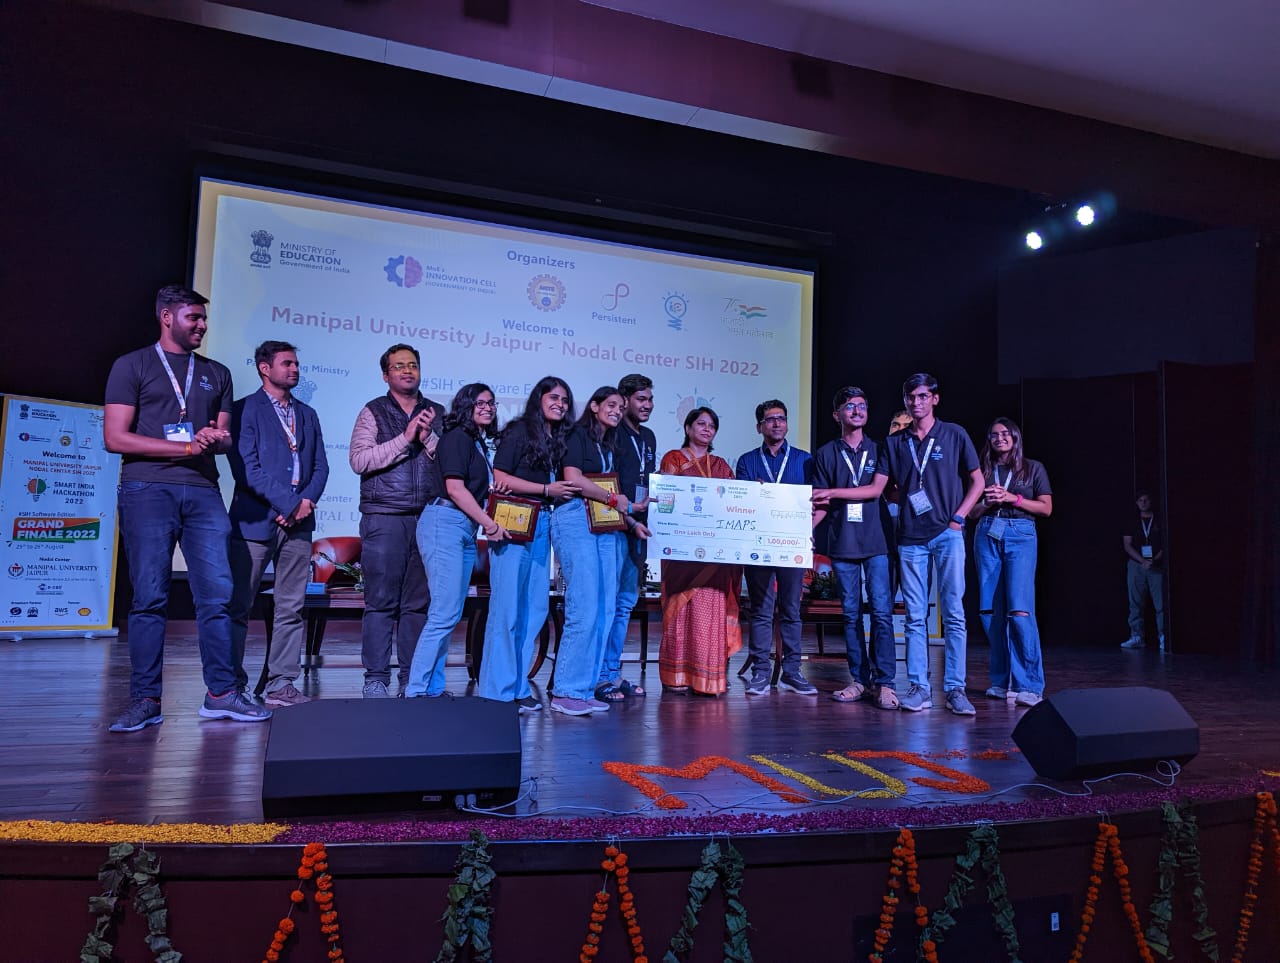 VALEDICTORY CEREMONY OF SMART INDIA HACKATHON 2022 GRAND FINALE HELD AT MANIPAL UNIVERSITY JAIPUR